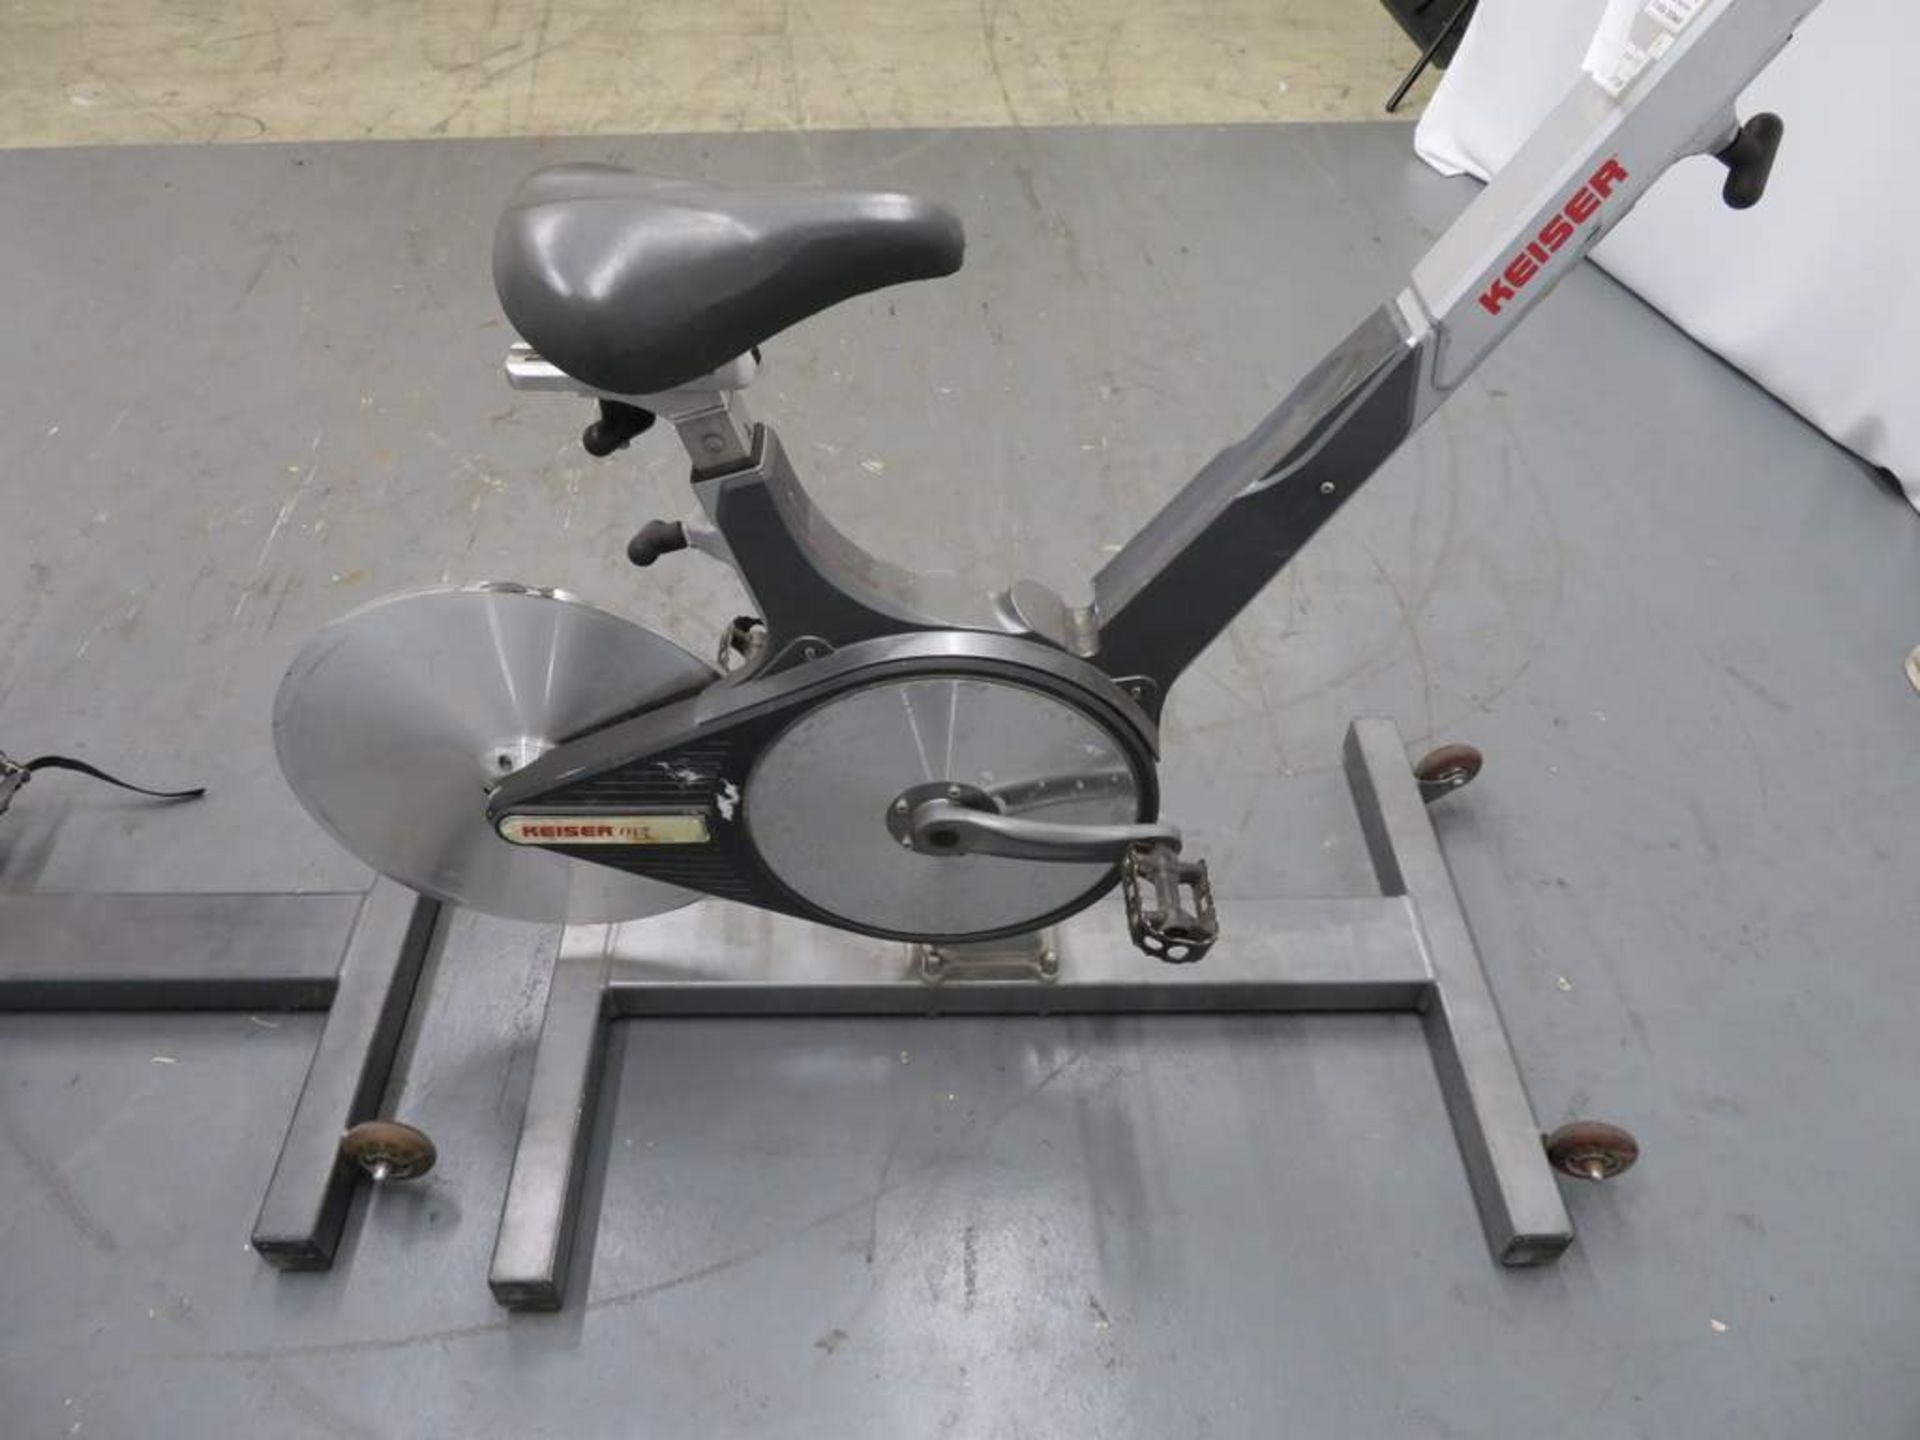 2x Keiser M3 Spinning Bike, Complete With Digital Console (damaged) & Adjustable Seat. - Image 6 of 10